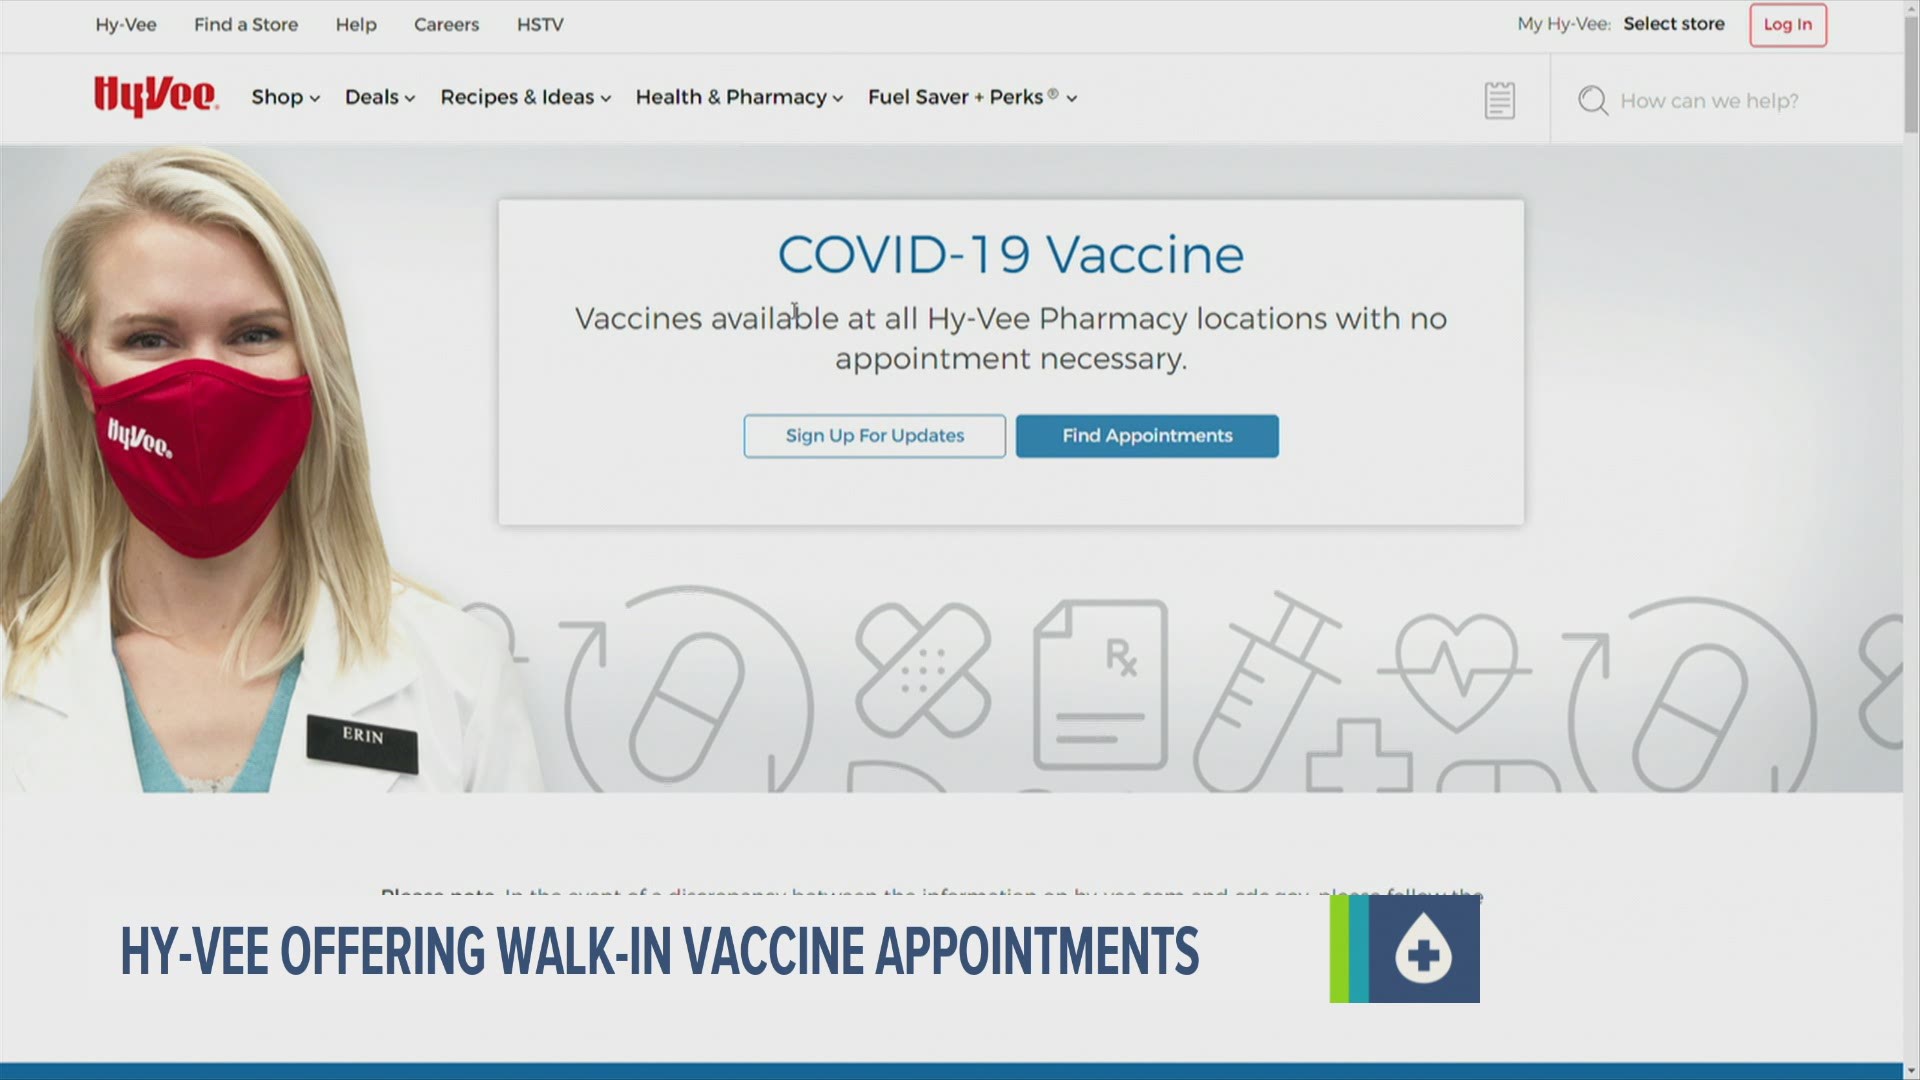 The grocer's vaccine website, last updated on April 27, now says, "Vaccines available at all Hy-Vee Pharmacy locations with no appointment necessary."